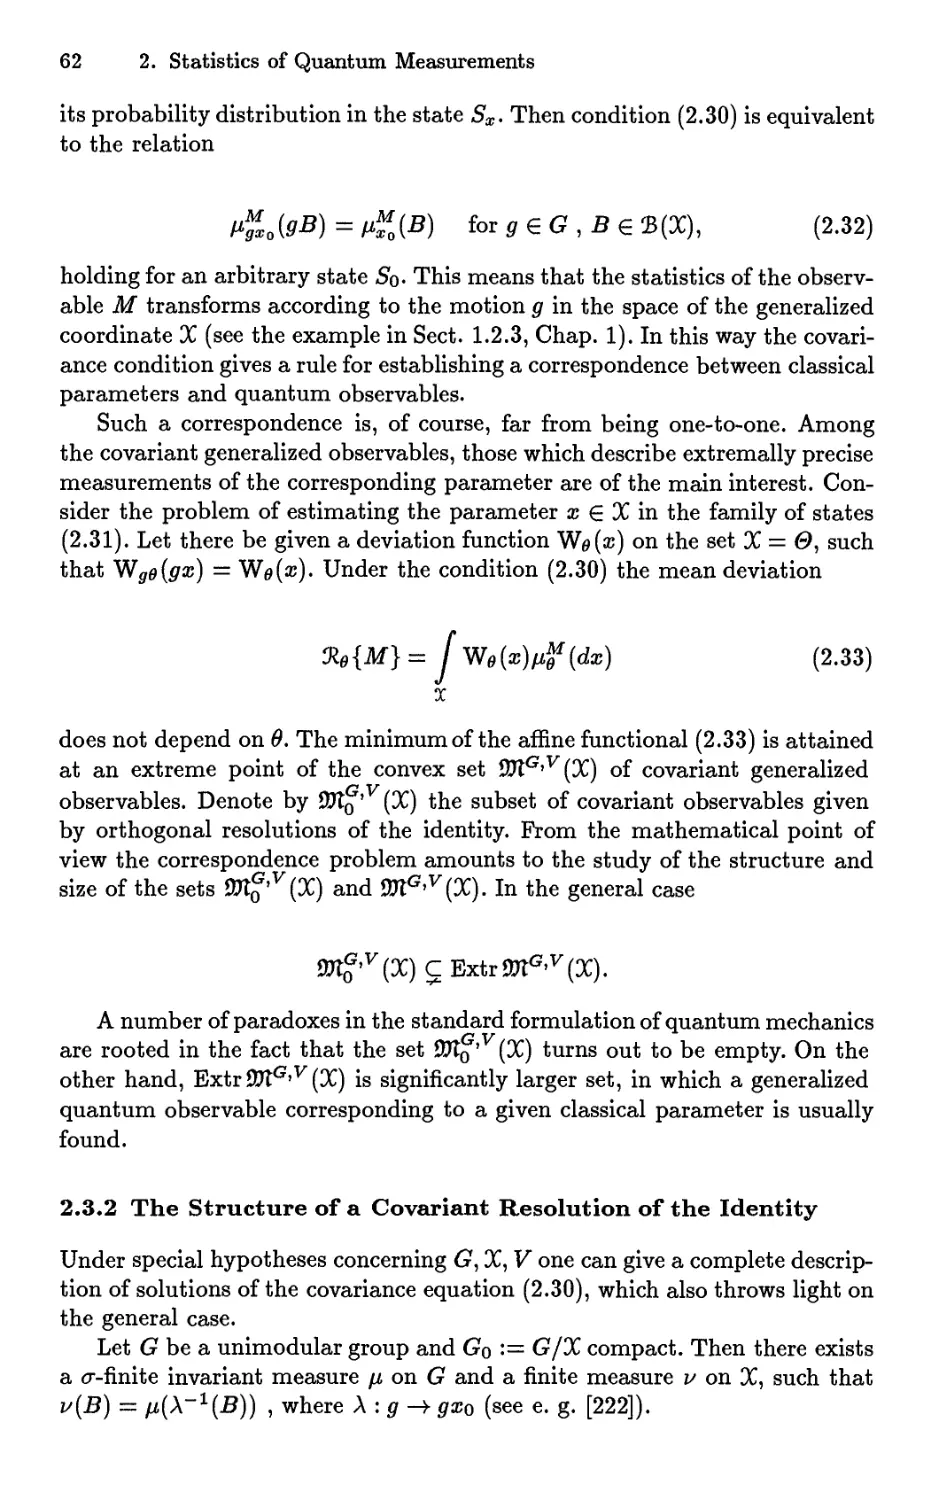 2.3.2 The Structure of a Covariant Resolution of the Identity